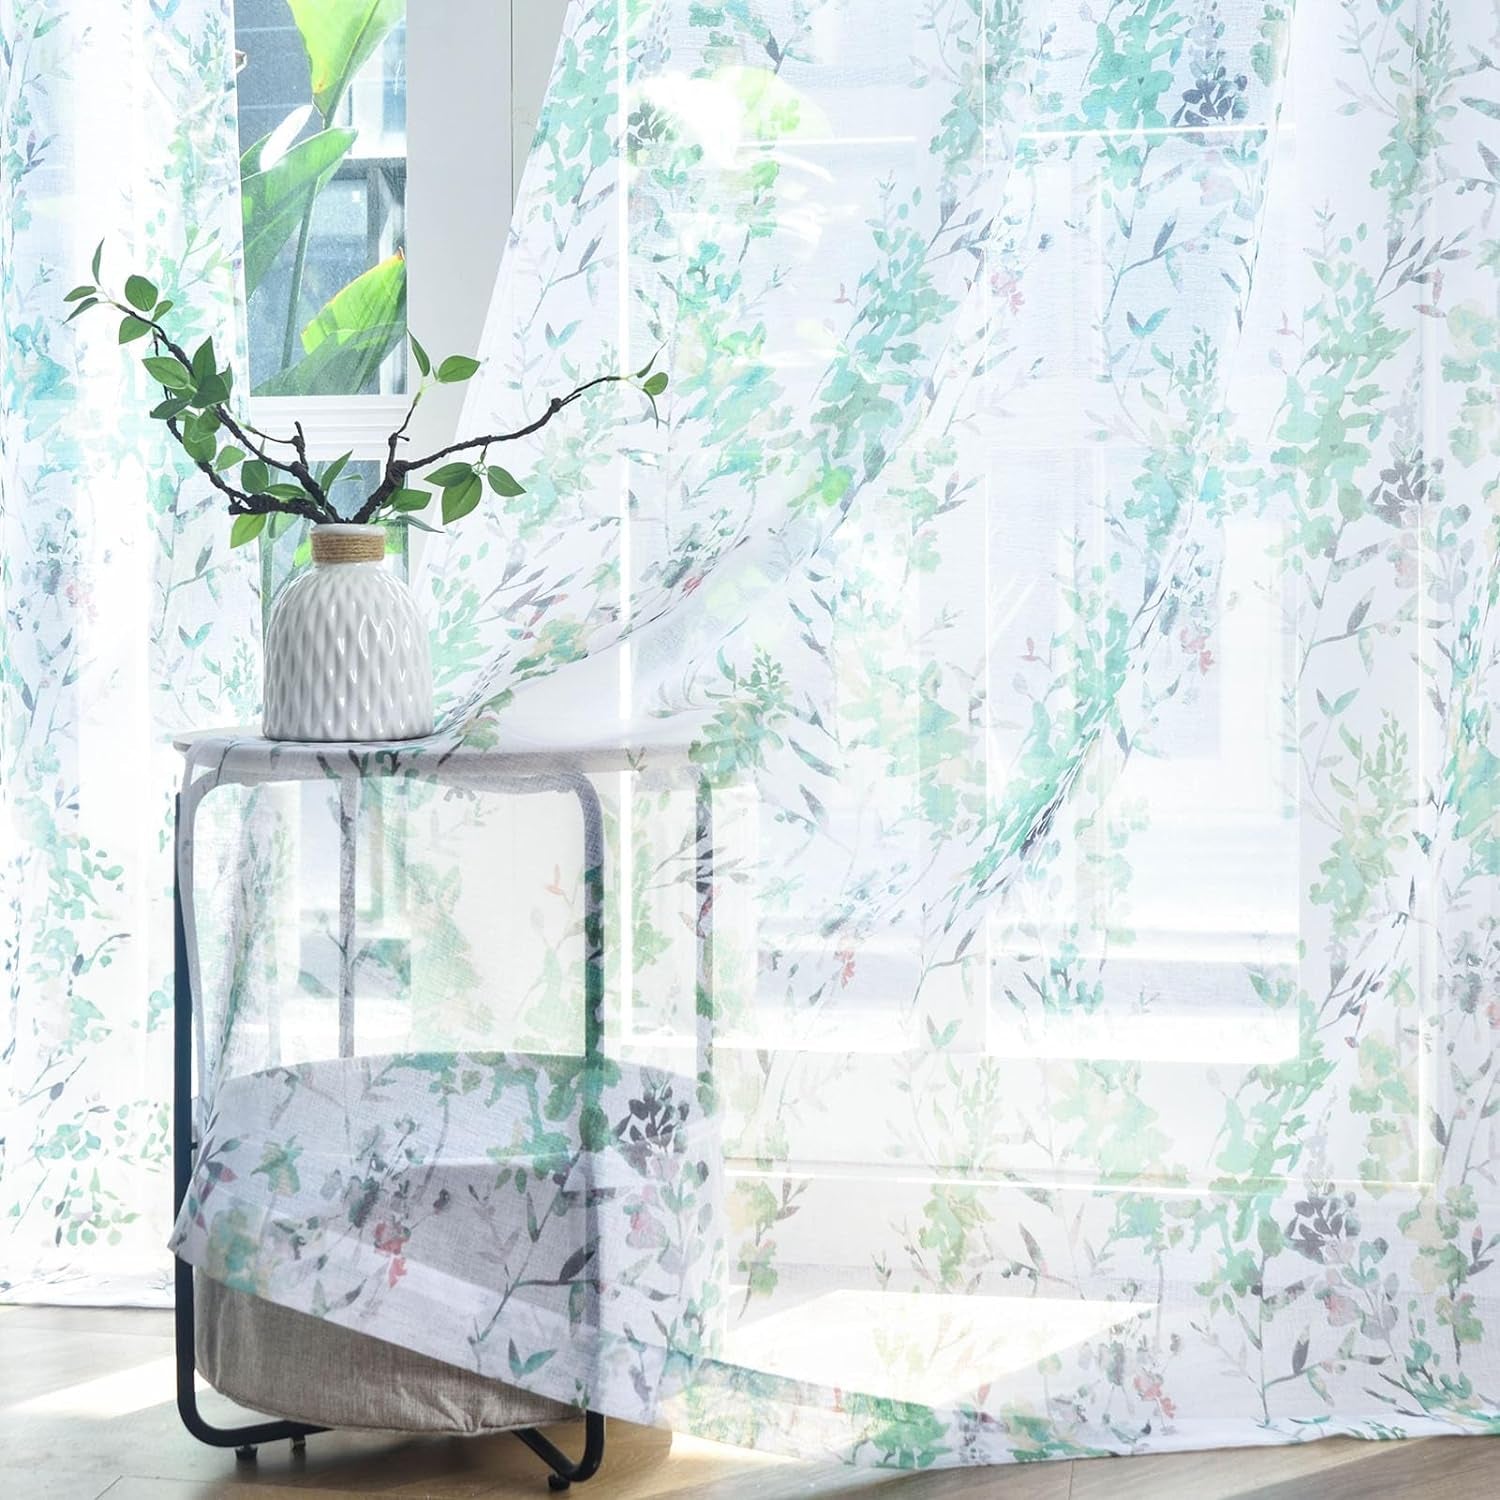 Kotile Purple White Sheer Curtains, Country Branch Leaf Print Sheer Curtains 63 Inch Length for Bedroom, Rod Pocket Privacy Floral Sheer Window Curtains, 50 X 63 Inch, 2 Panels, Purple  Kotile Textile Green W50 X L84 Inch 